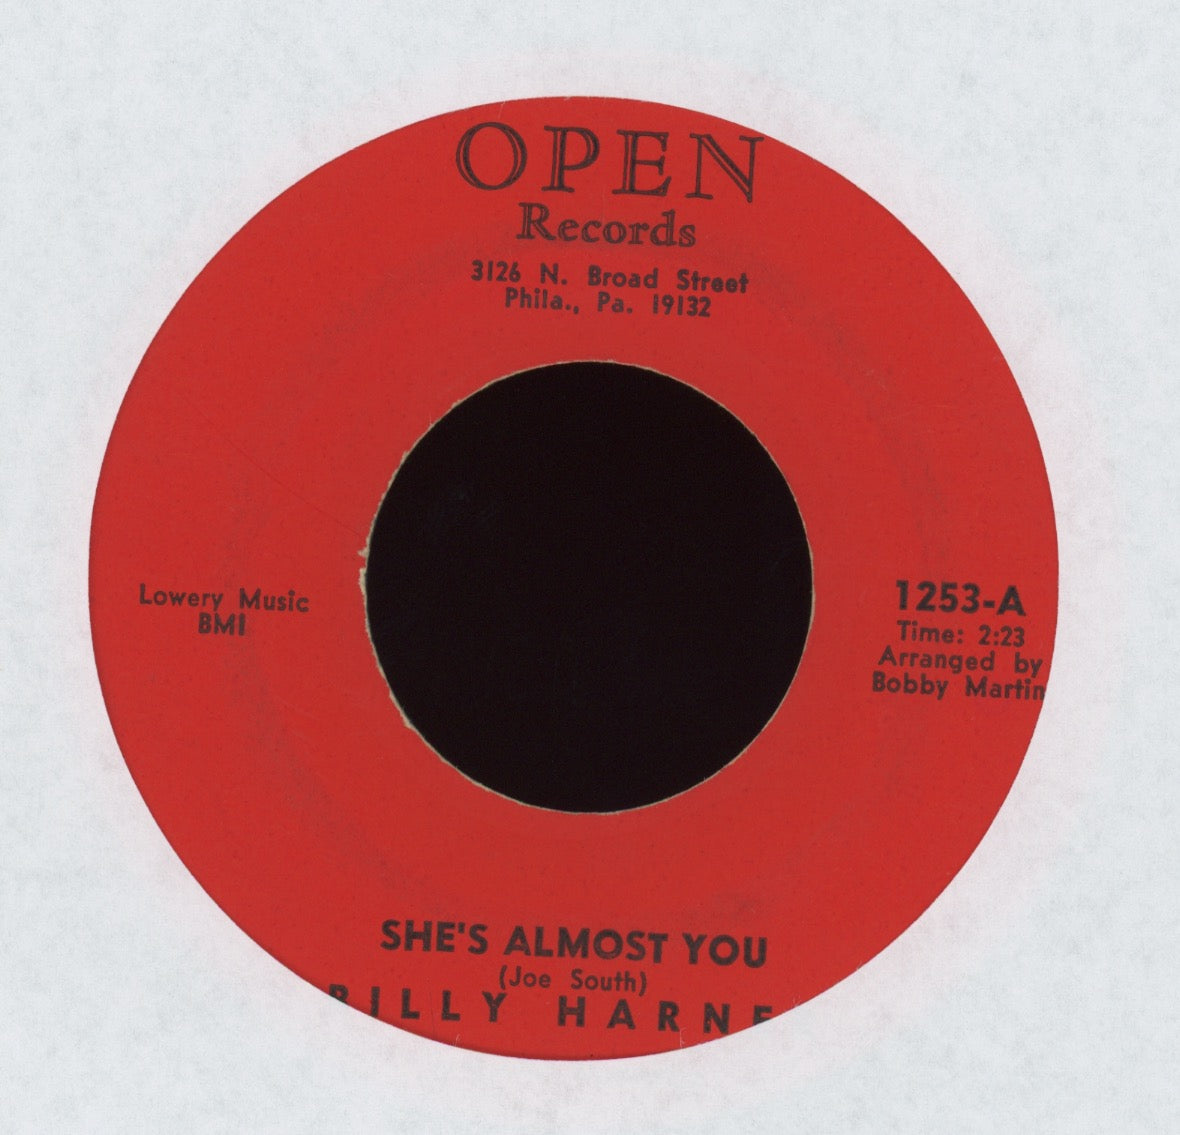 Billy Harner - She's Almost You on Open